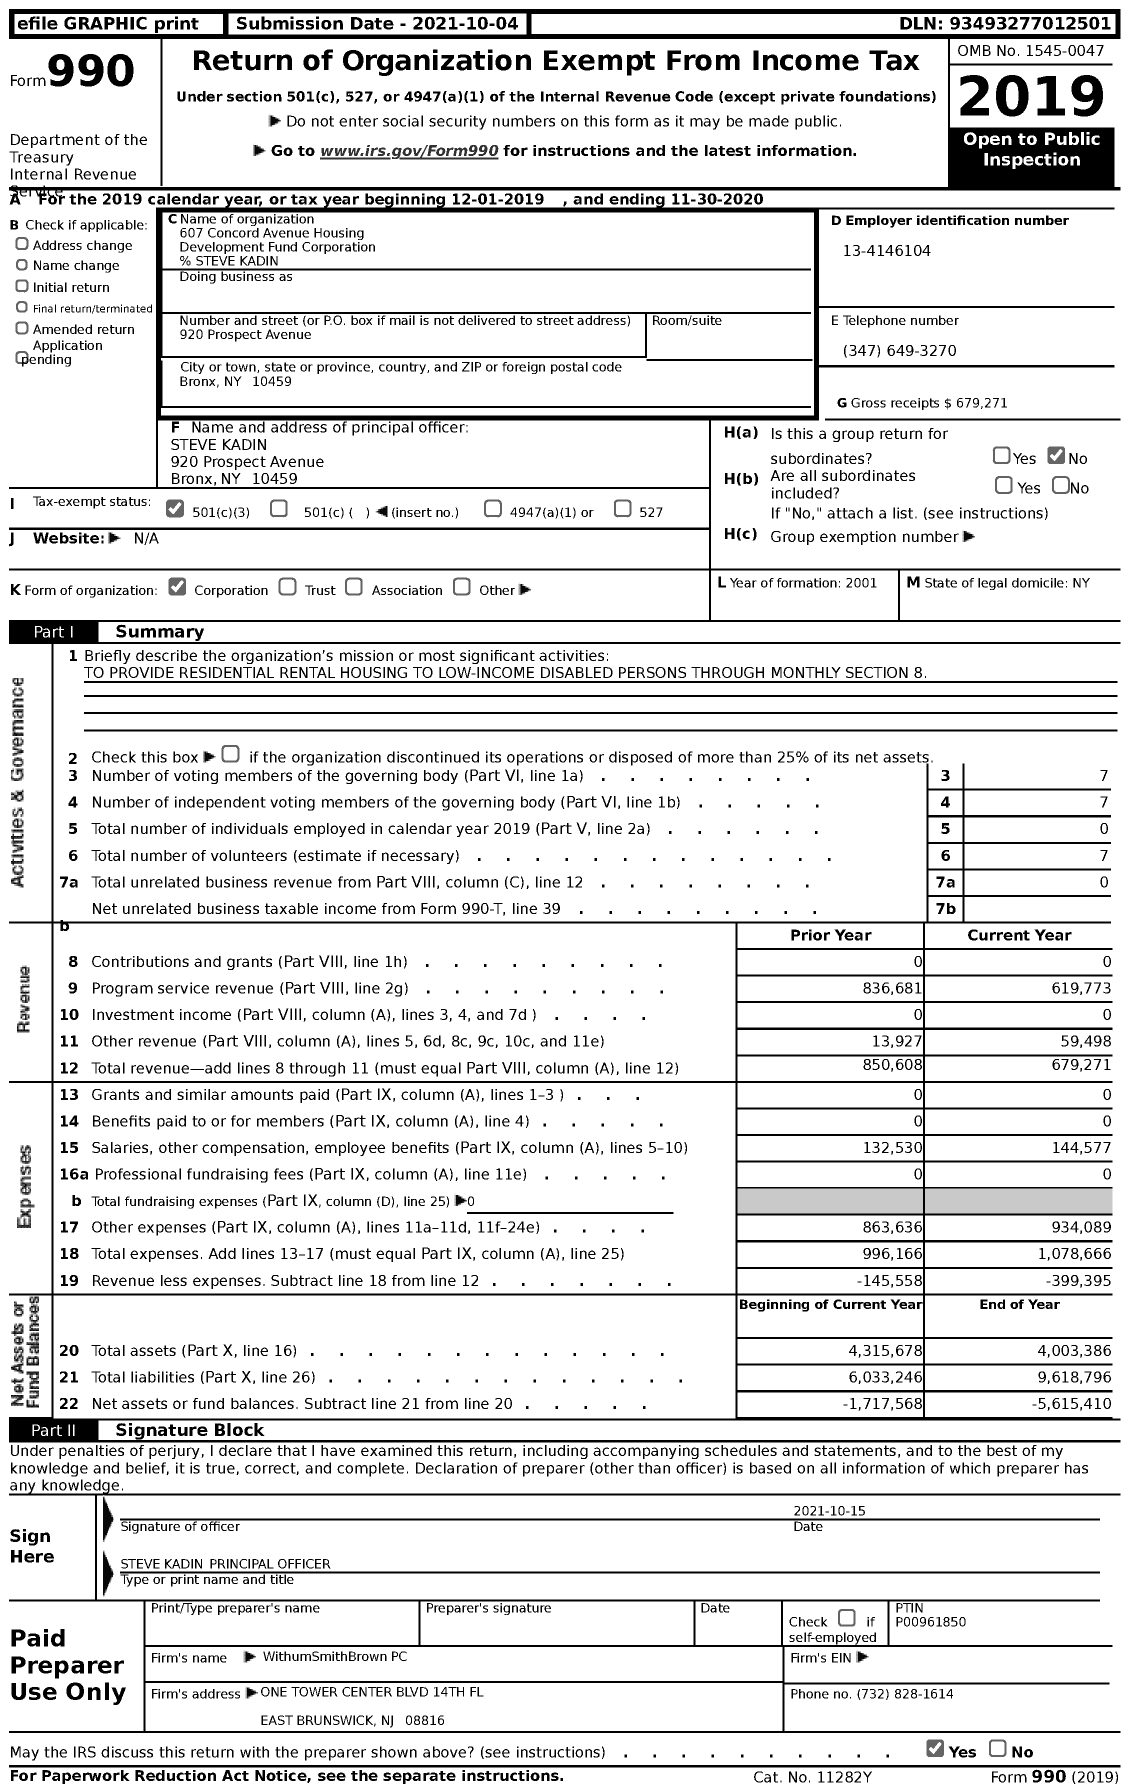 Image of first page of 2019 Form 990 for 607 Concord Avenue Housing Development Fund Corporation